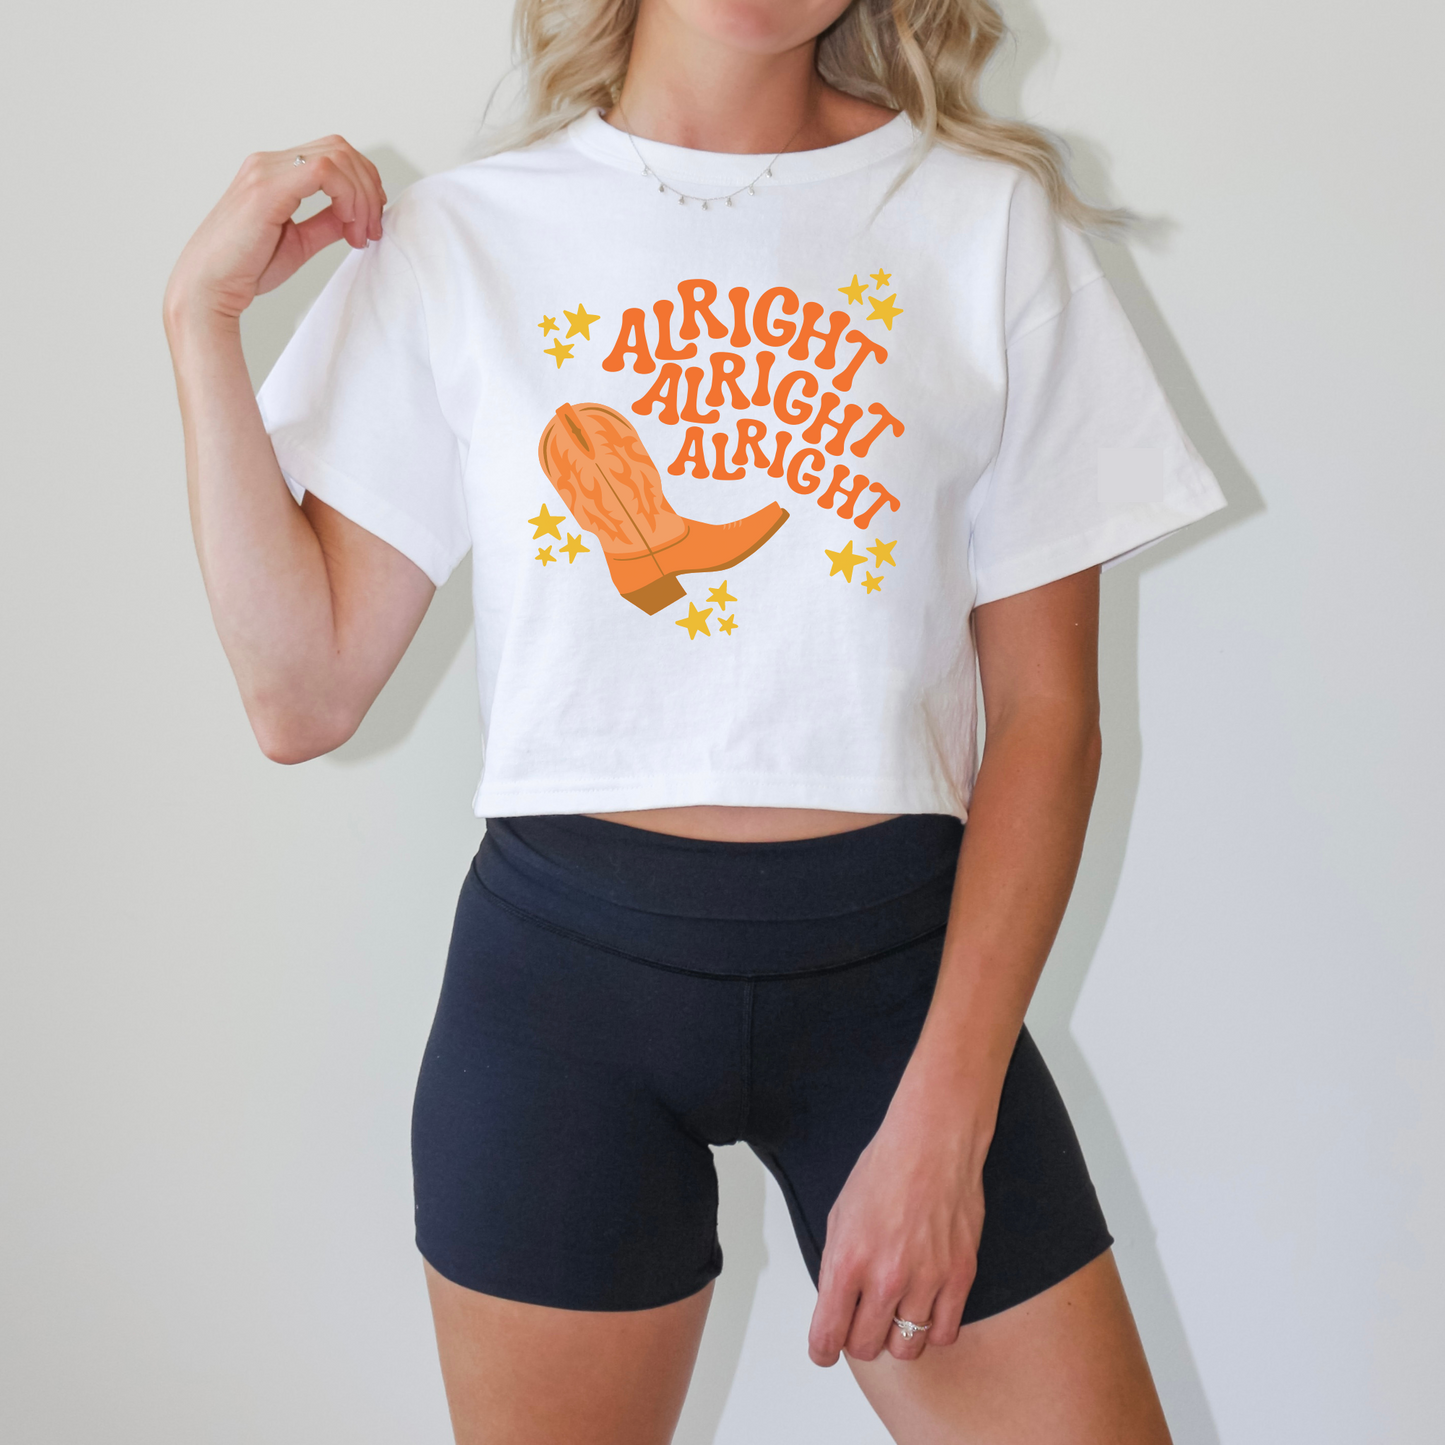 Alright Alright Alright Cropped Tee